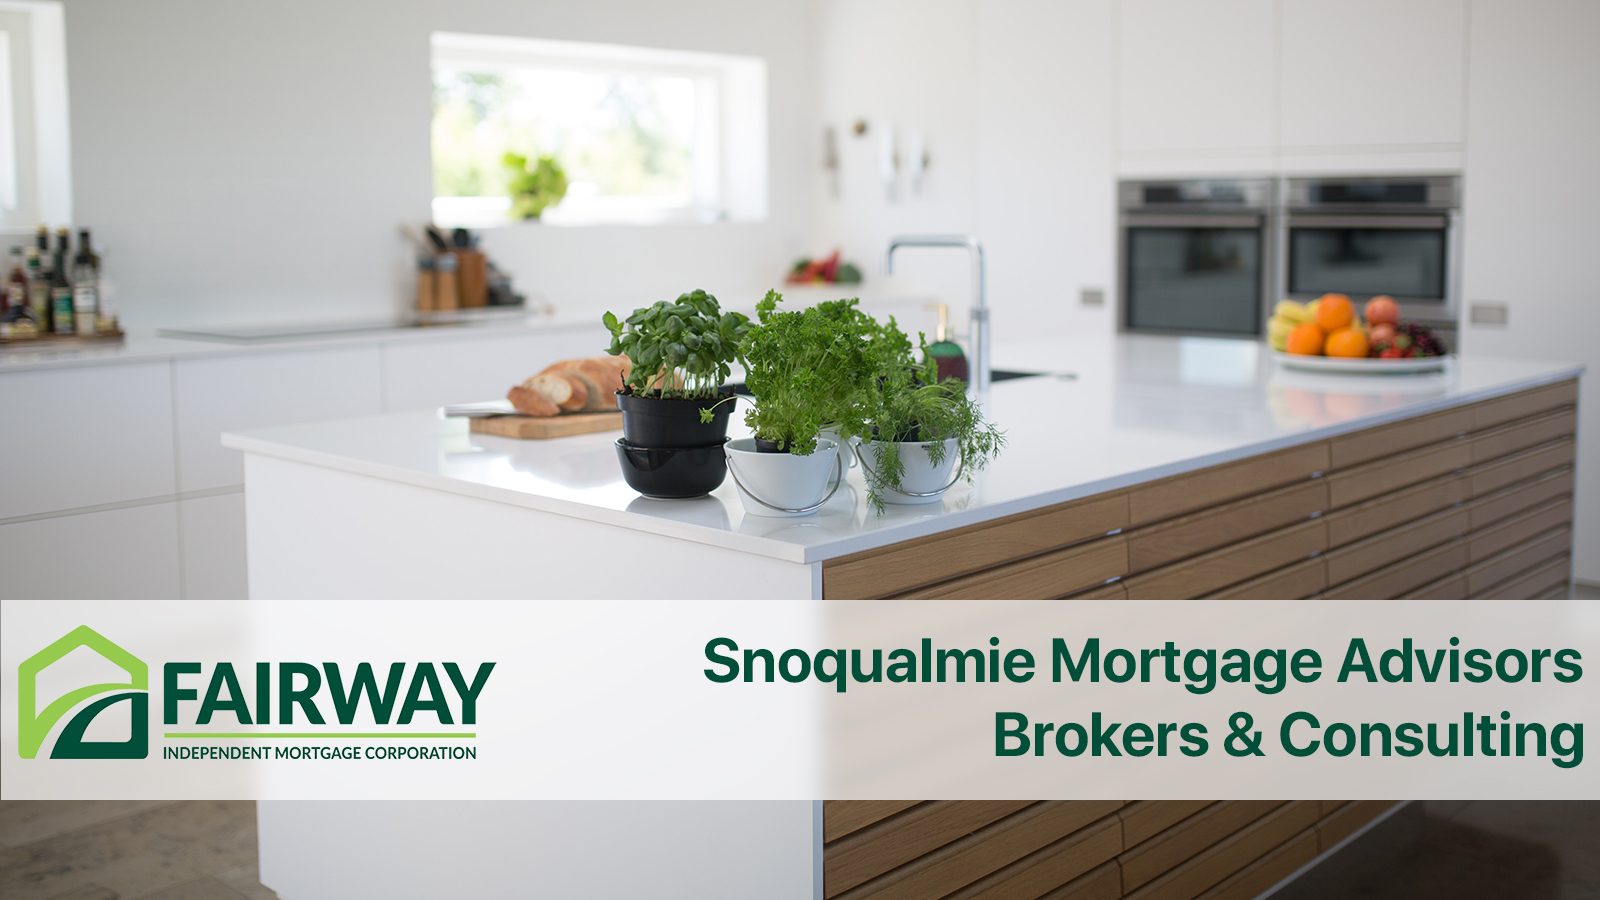 Snoqualmie Mortgage Advisors, Brokers and Consulting